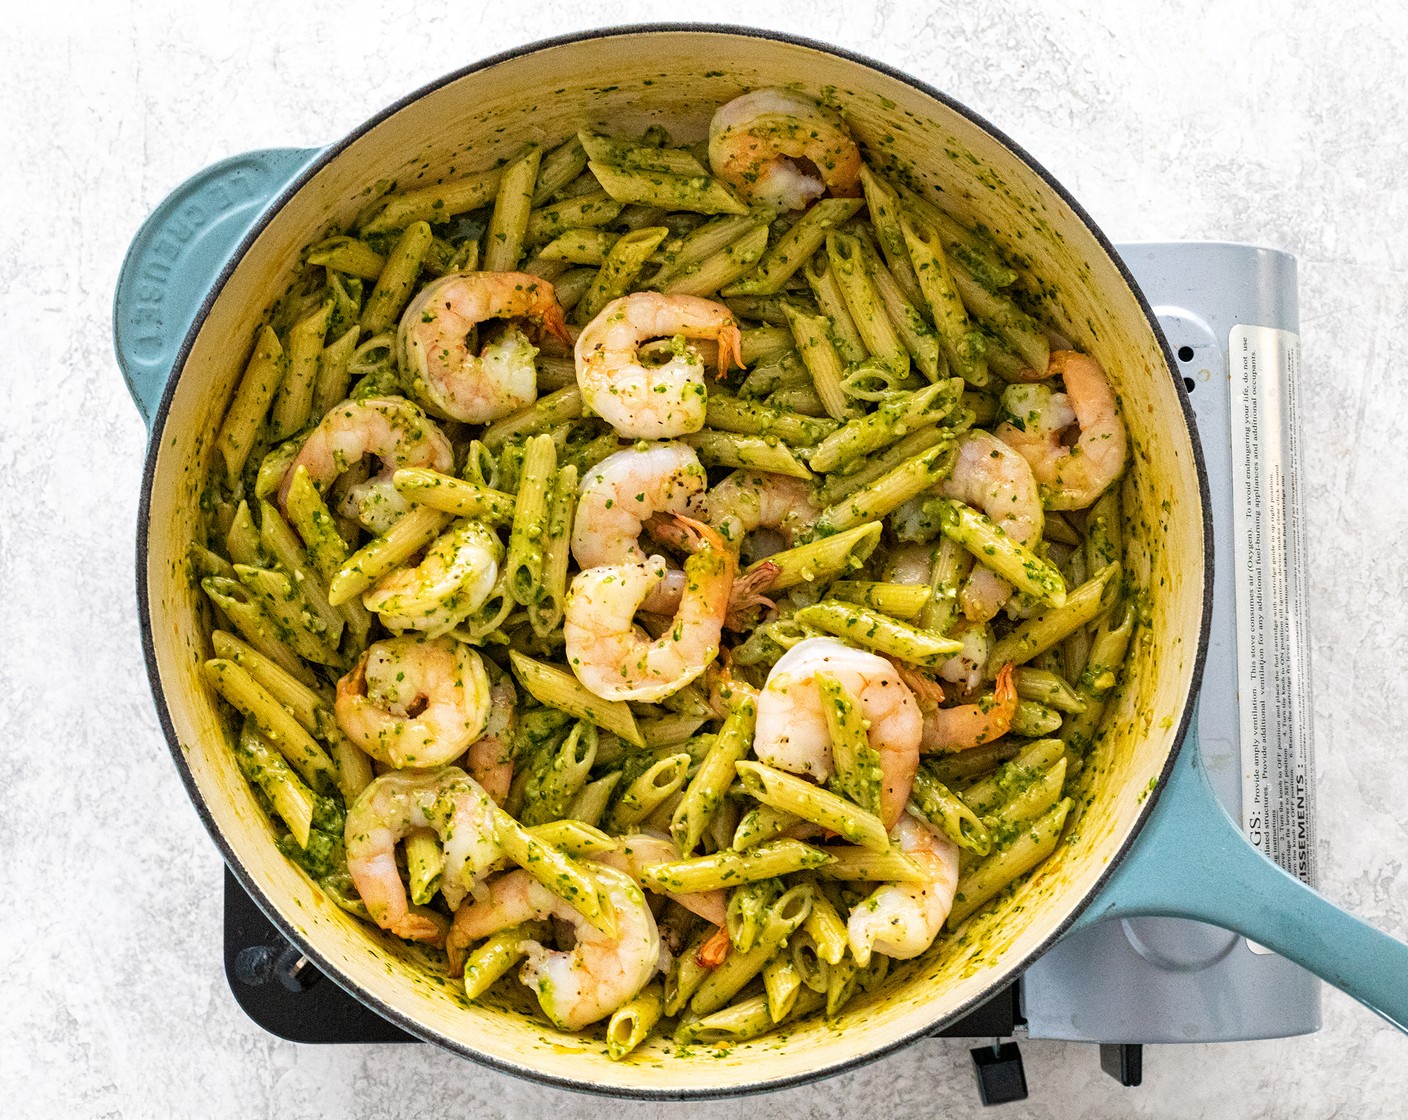 step 6 Add ½ cup of the pesto sauce and gently stir to combine with the pasta. Add more to taste, or save to use for another dish. Add shrimp back to the pan, toss to combine.